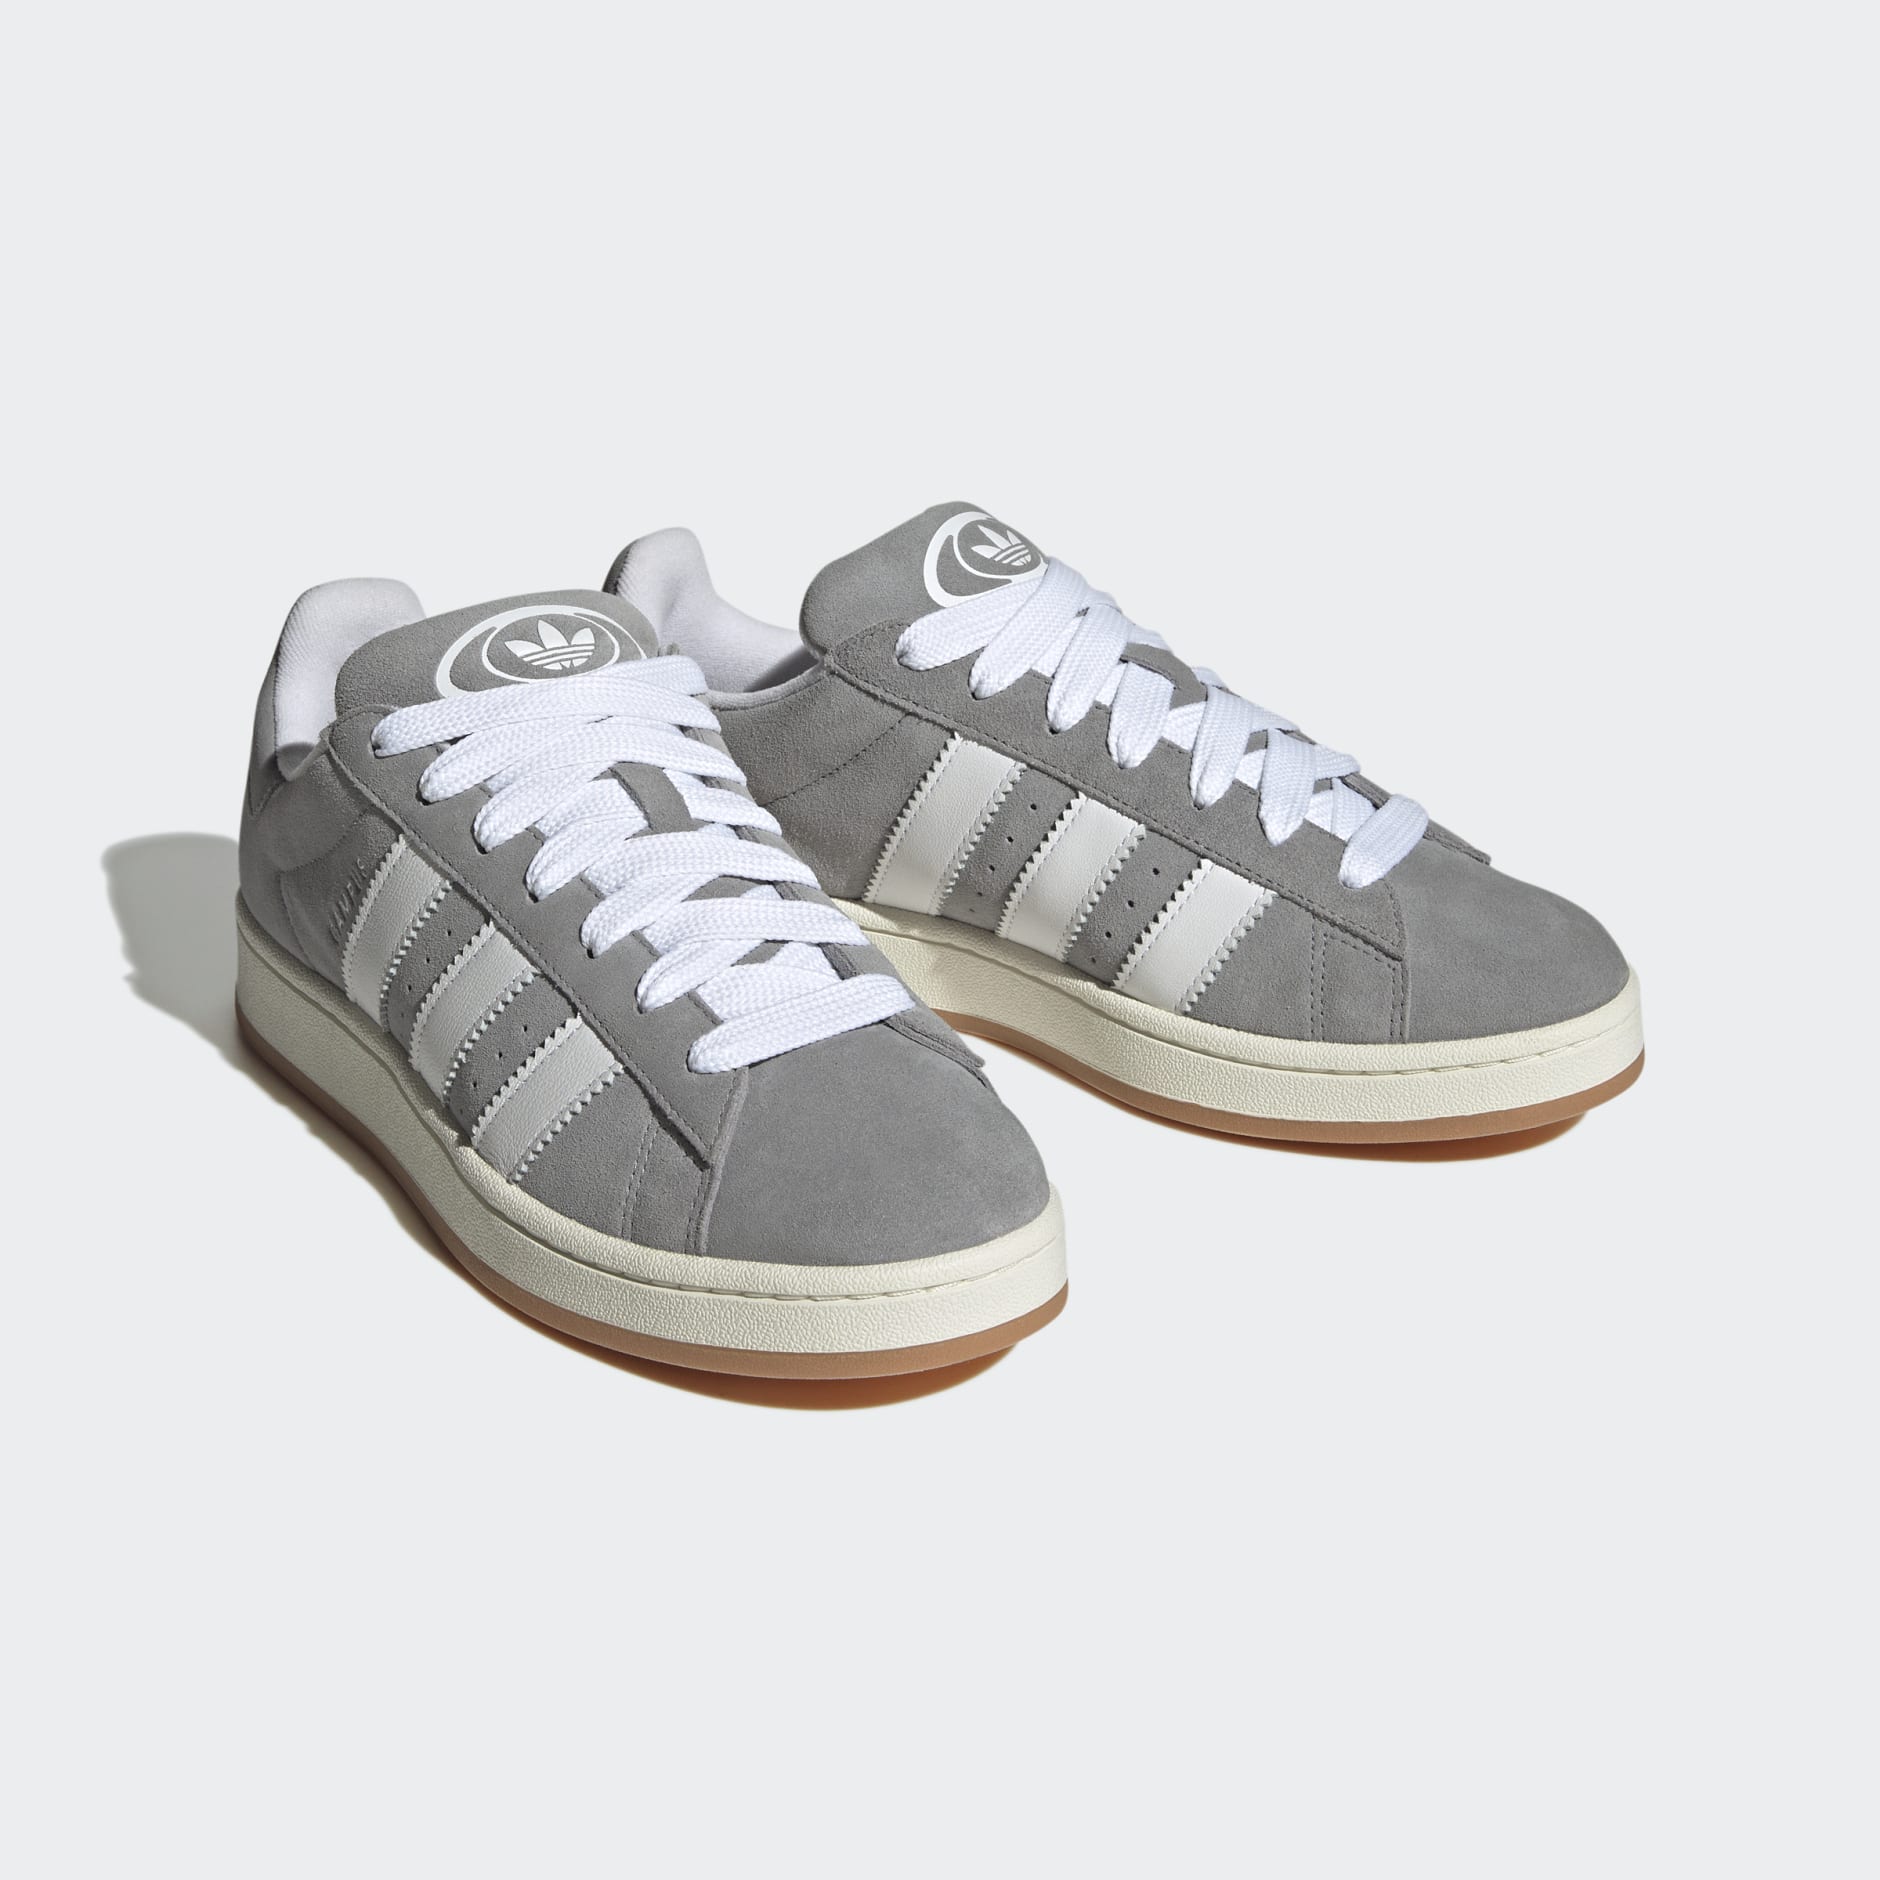 00s Shoes - Grey | KW